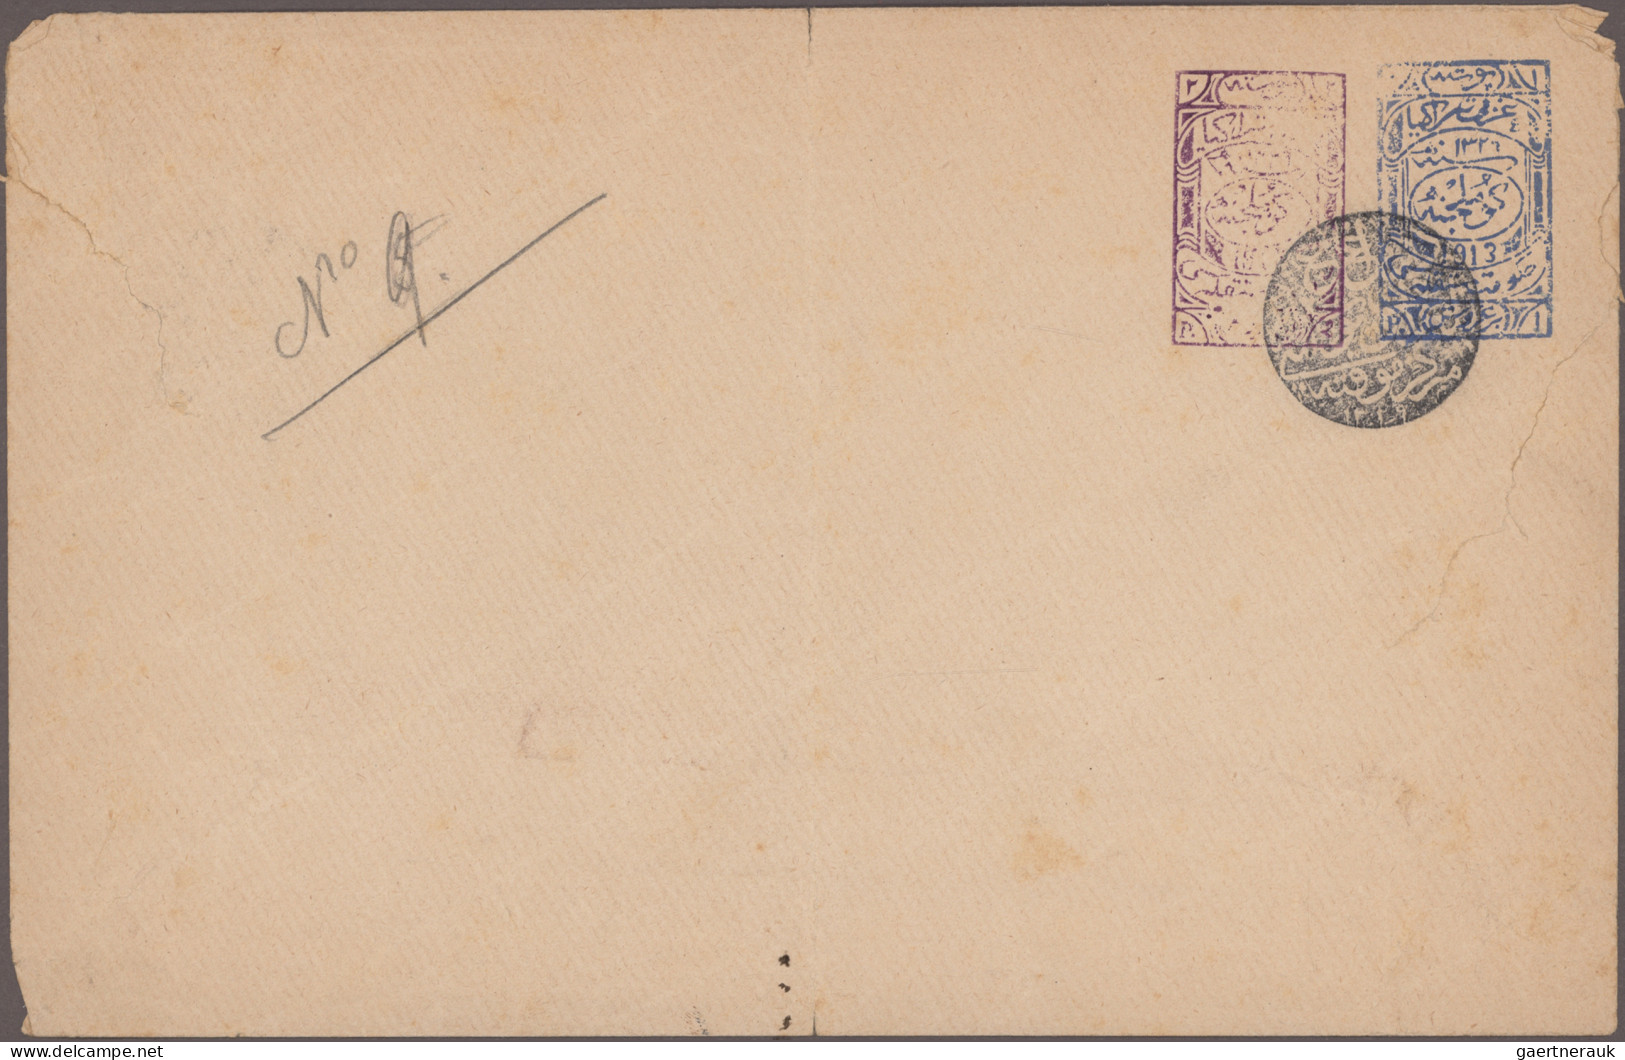 Thrace: 1919/1920, lot of 13 stationeries: nine envelopes and five cards, mainly